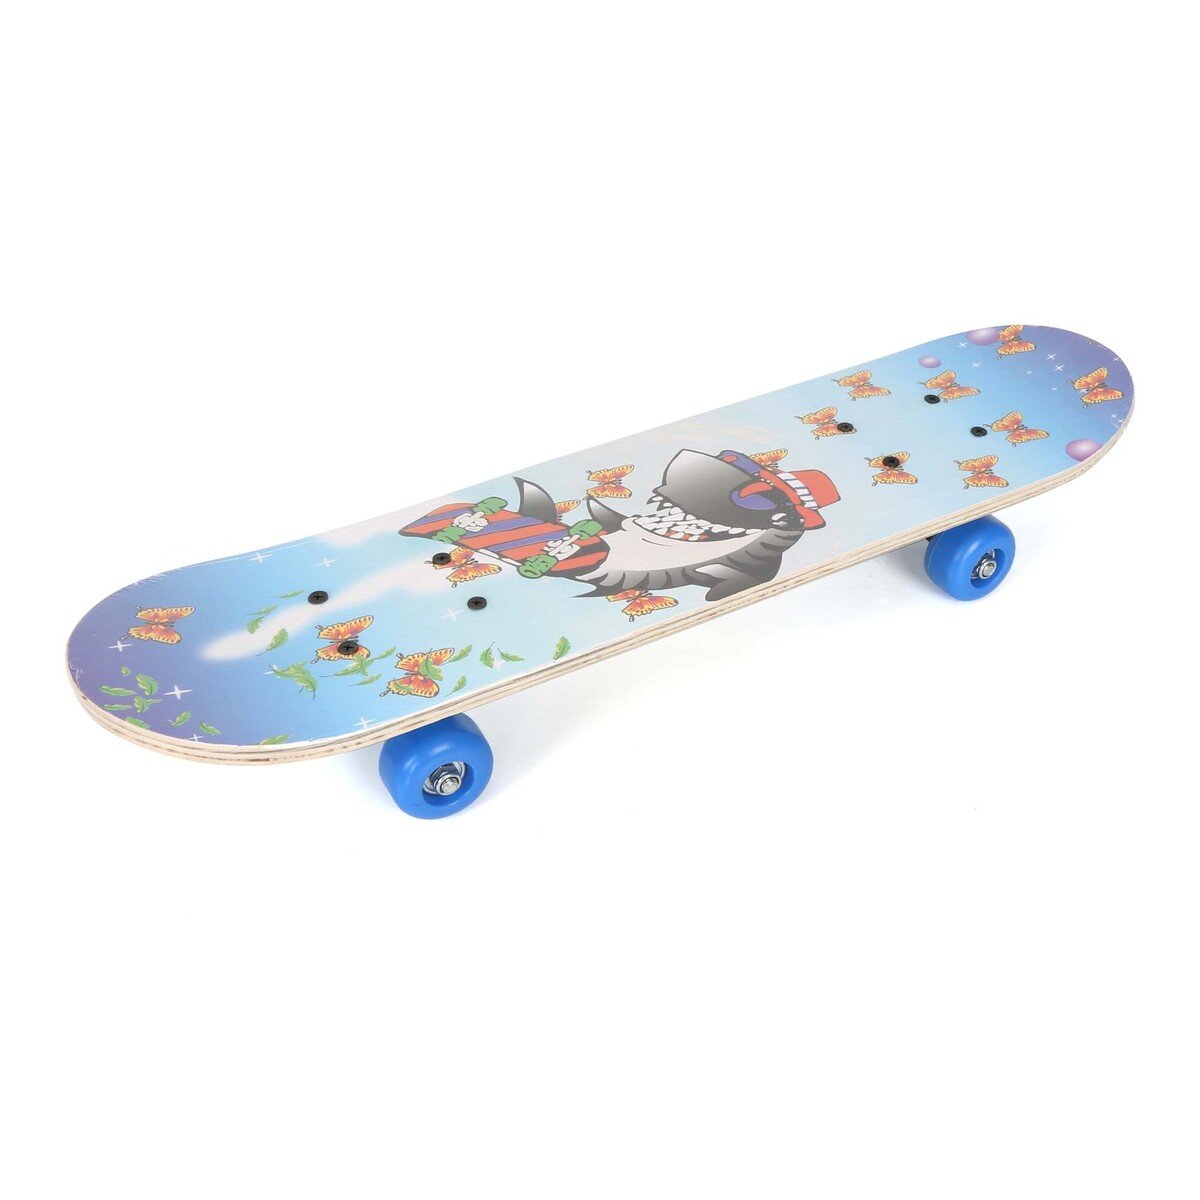 Sports Champion Skating Board XLT-2406A Assorted